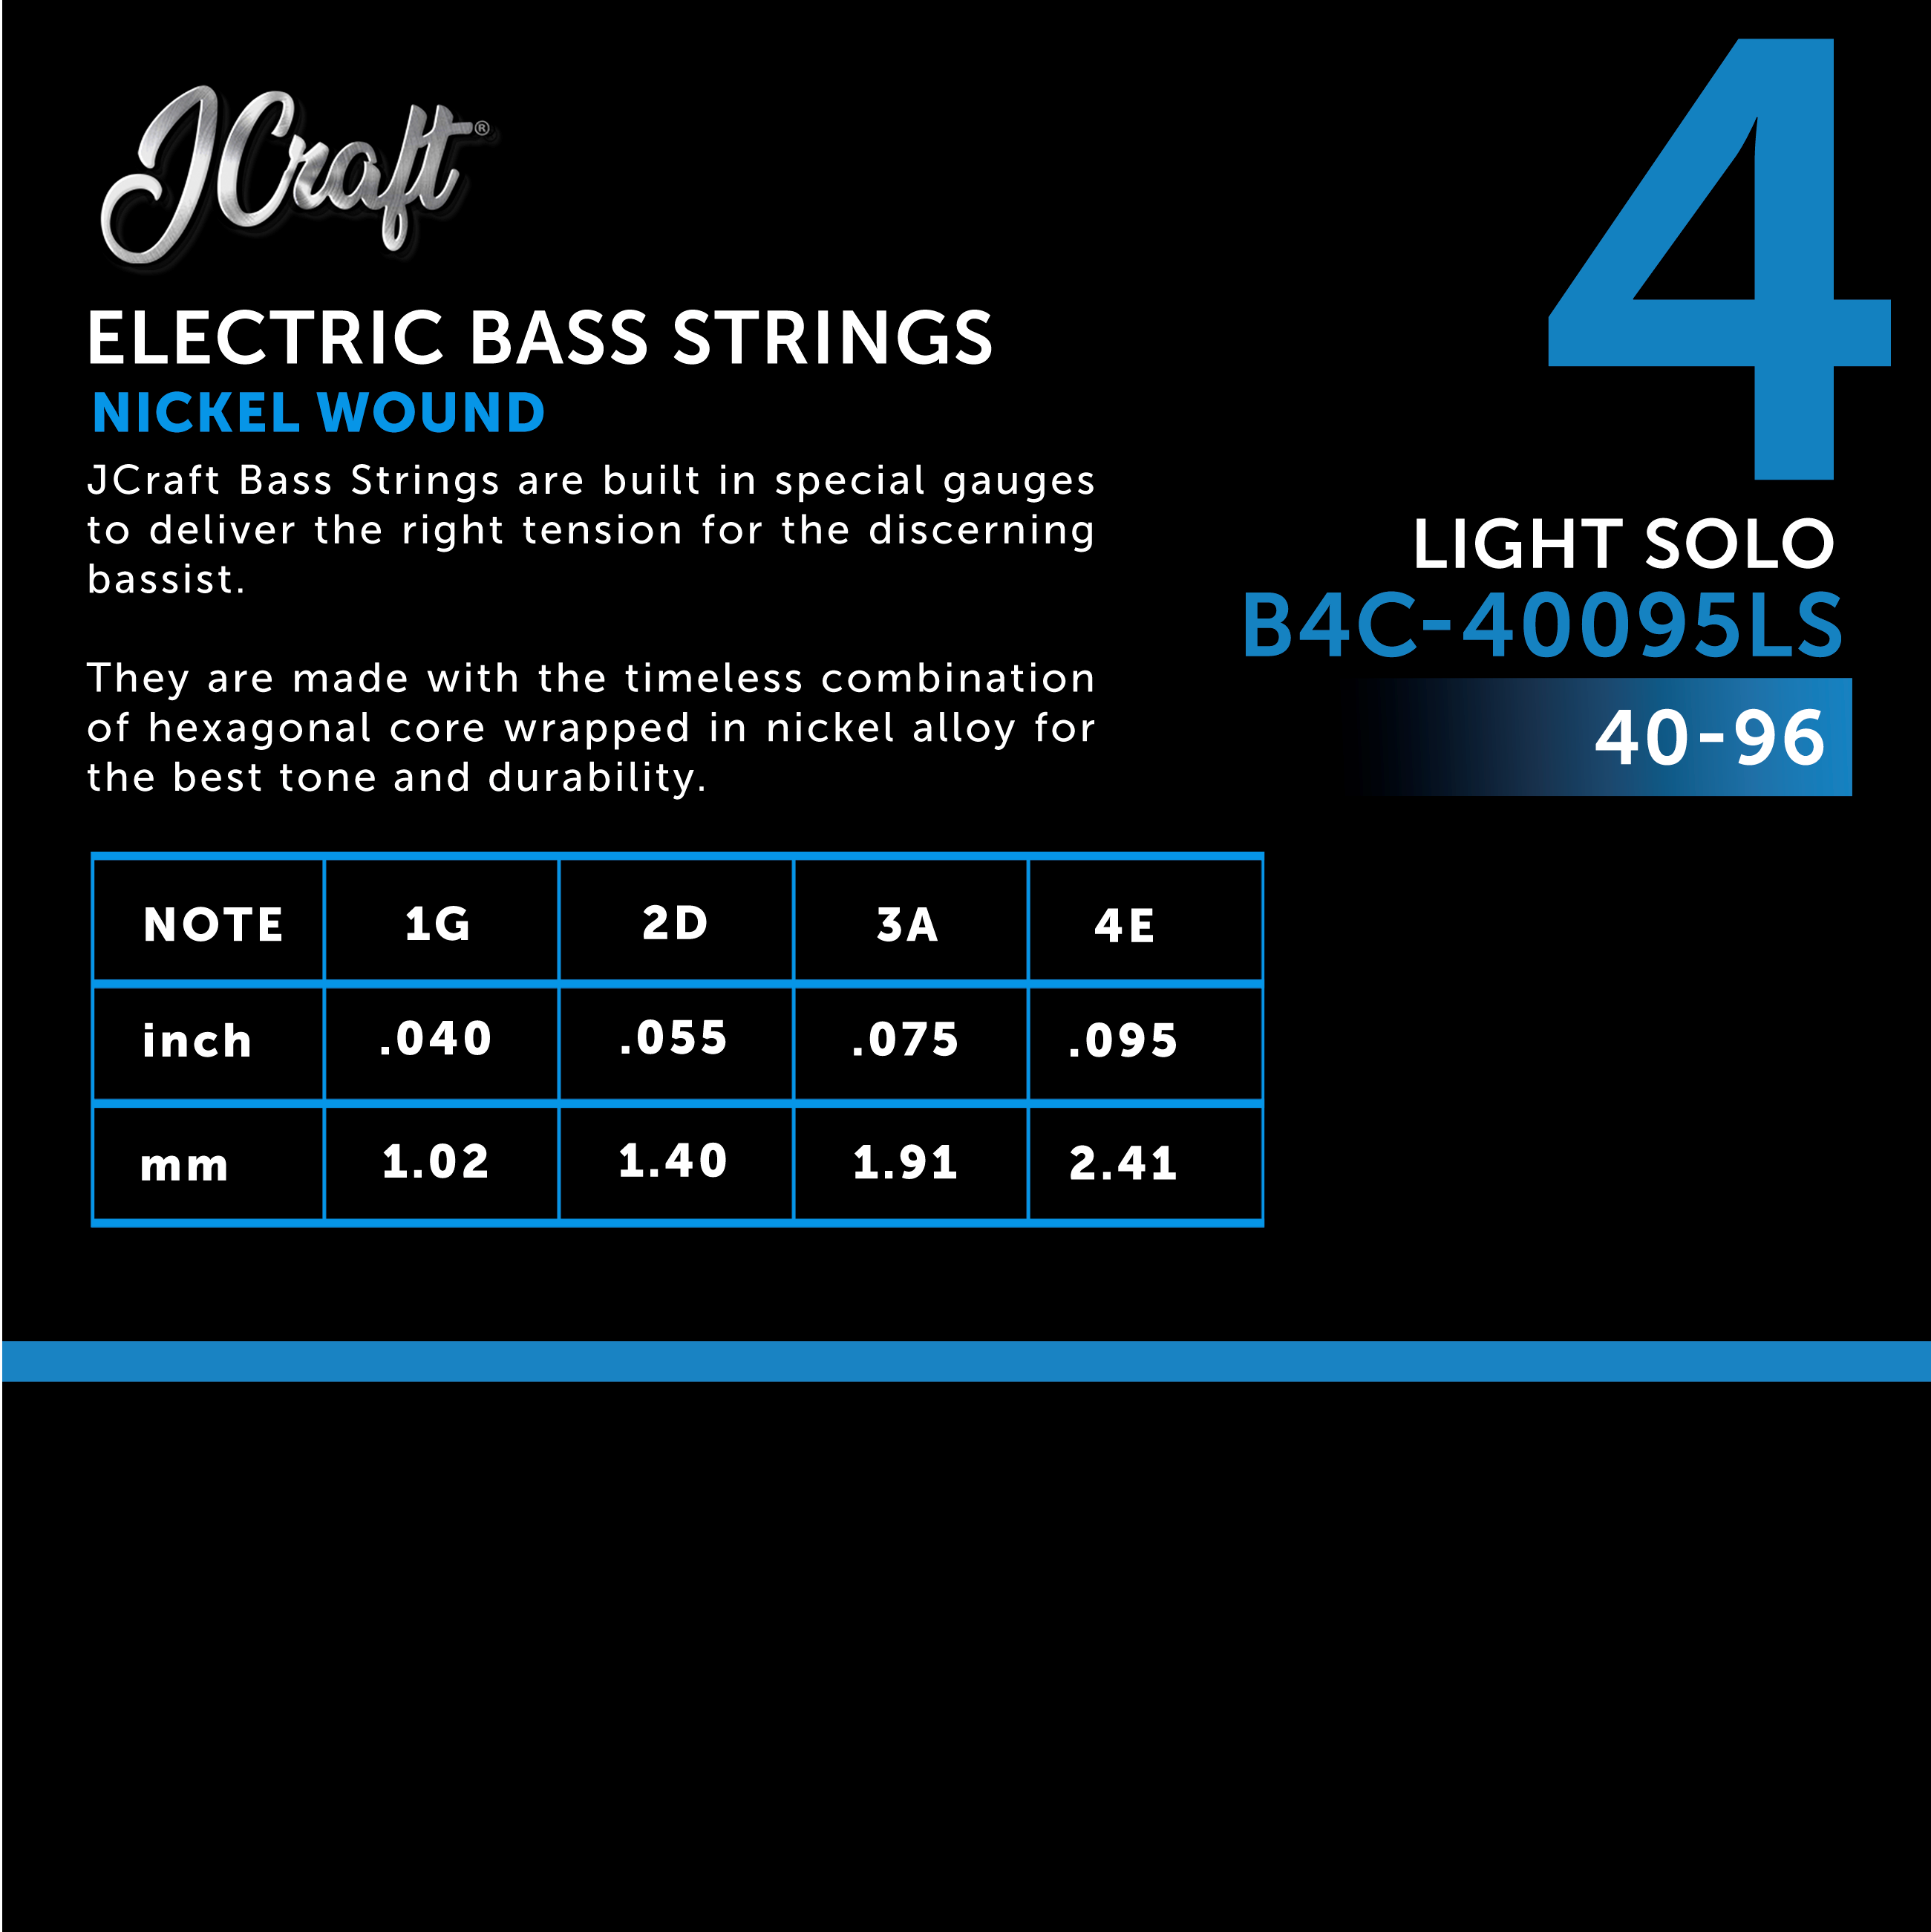 Happy Beat Online Music Shop - JCRAFT PB-1 4-STRING ELECTRIC BASS GUITAR  WITH GIGBAG ₱6,100 Body Shape: P-Bass Body: Basswood Neck: Maple  Fingerboard: 22 frets Maple Pickup configuration: Dual P Electronics: 1